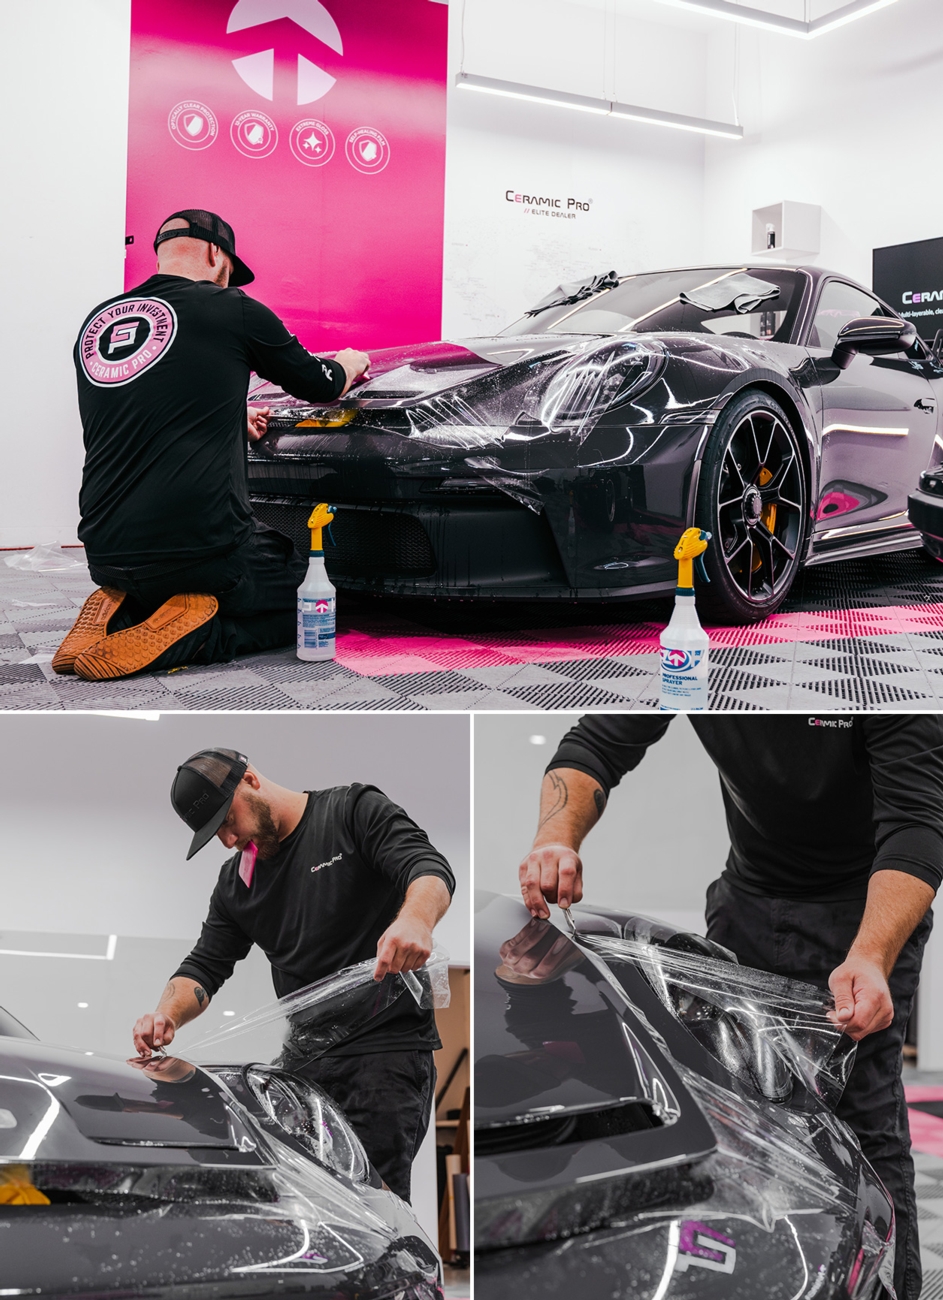 Best Ceramic Coating for Cars - 10 Effective Paint Protection 2019 Review